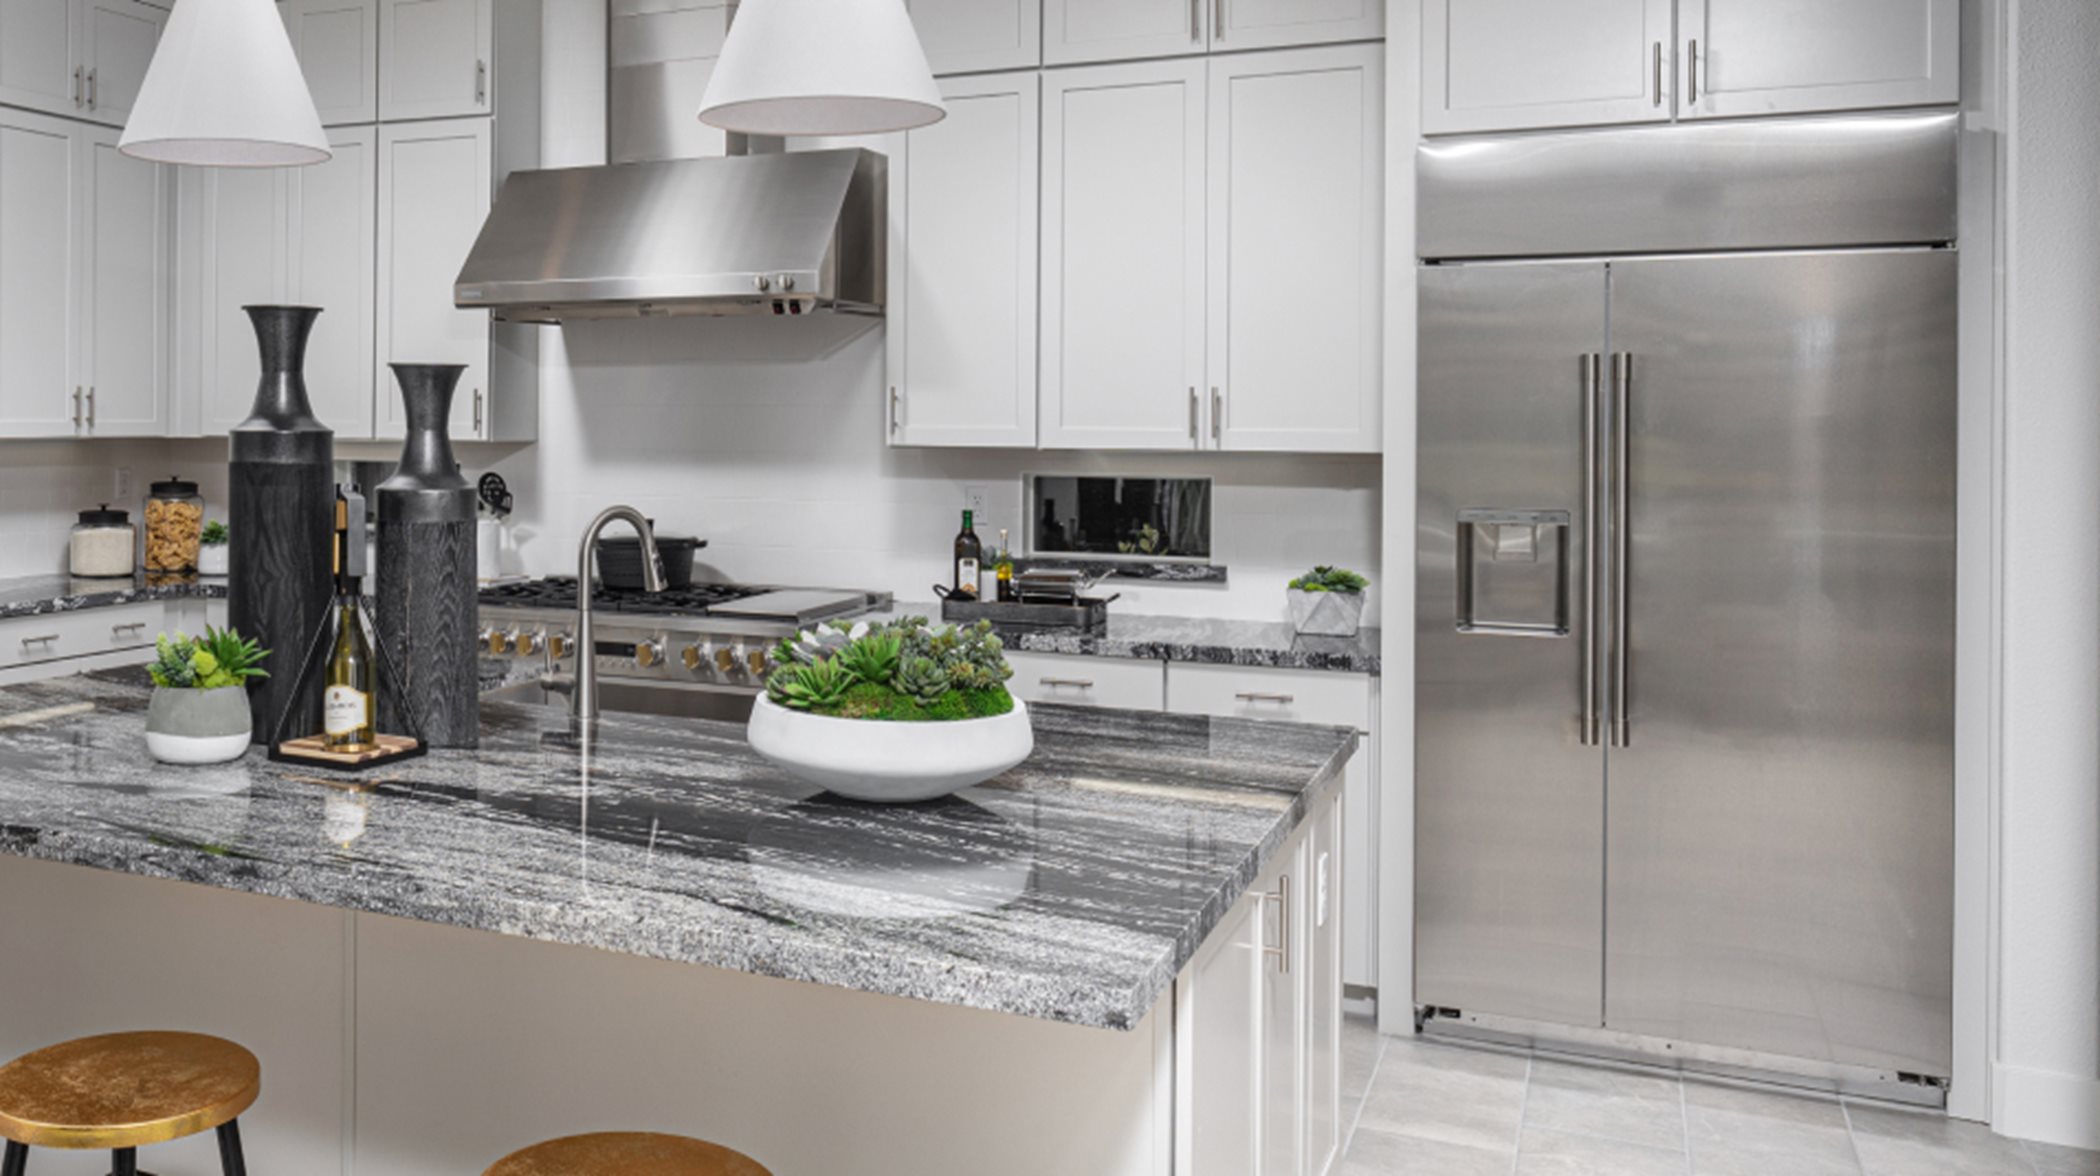 Sleek countertops offer a heat and stain-resistant surface